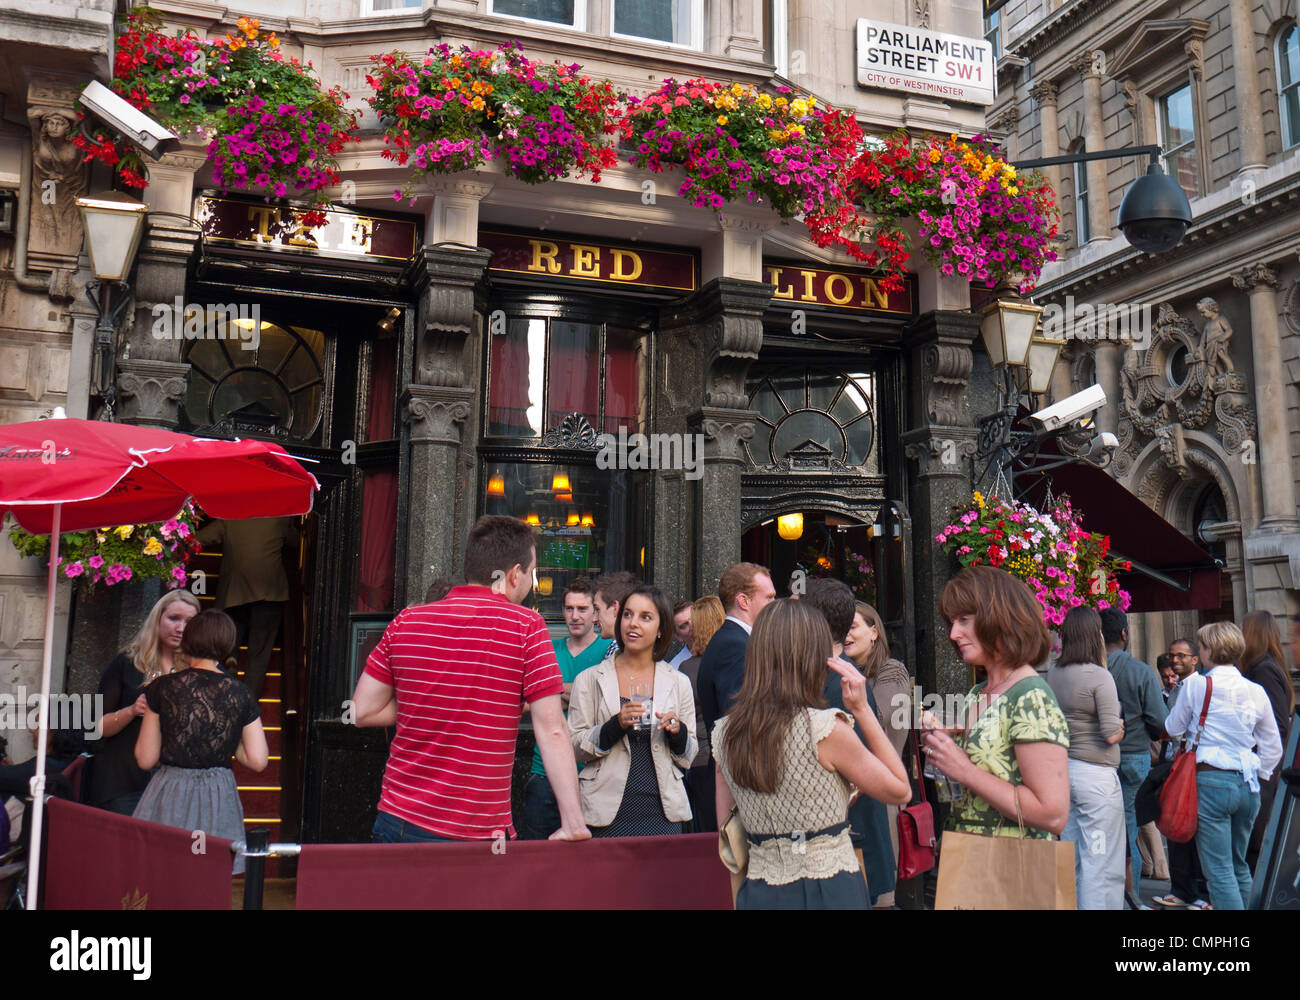 DRINKING PAVEMENT STREET OUTDOORS BUSY PUB people with drinks outside the Red Lion public house Parliament Street London SW1 Stock Photo